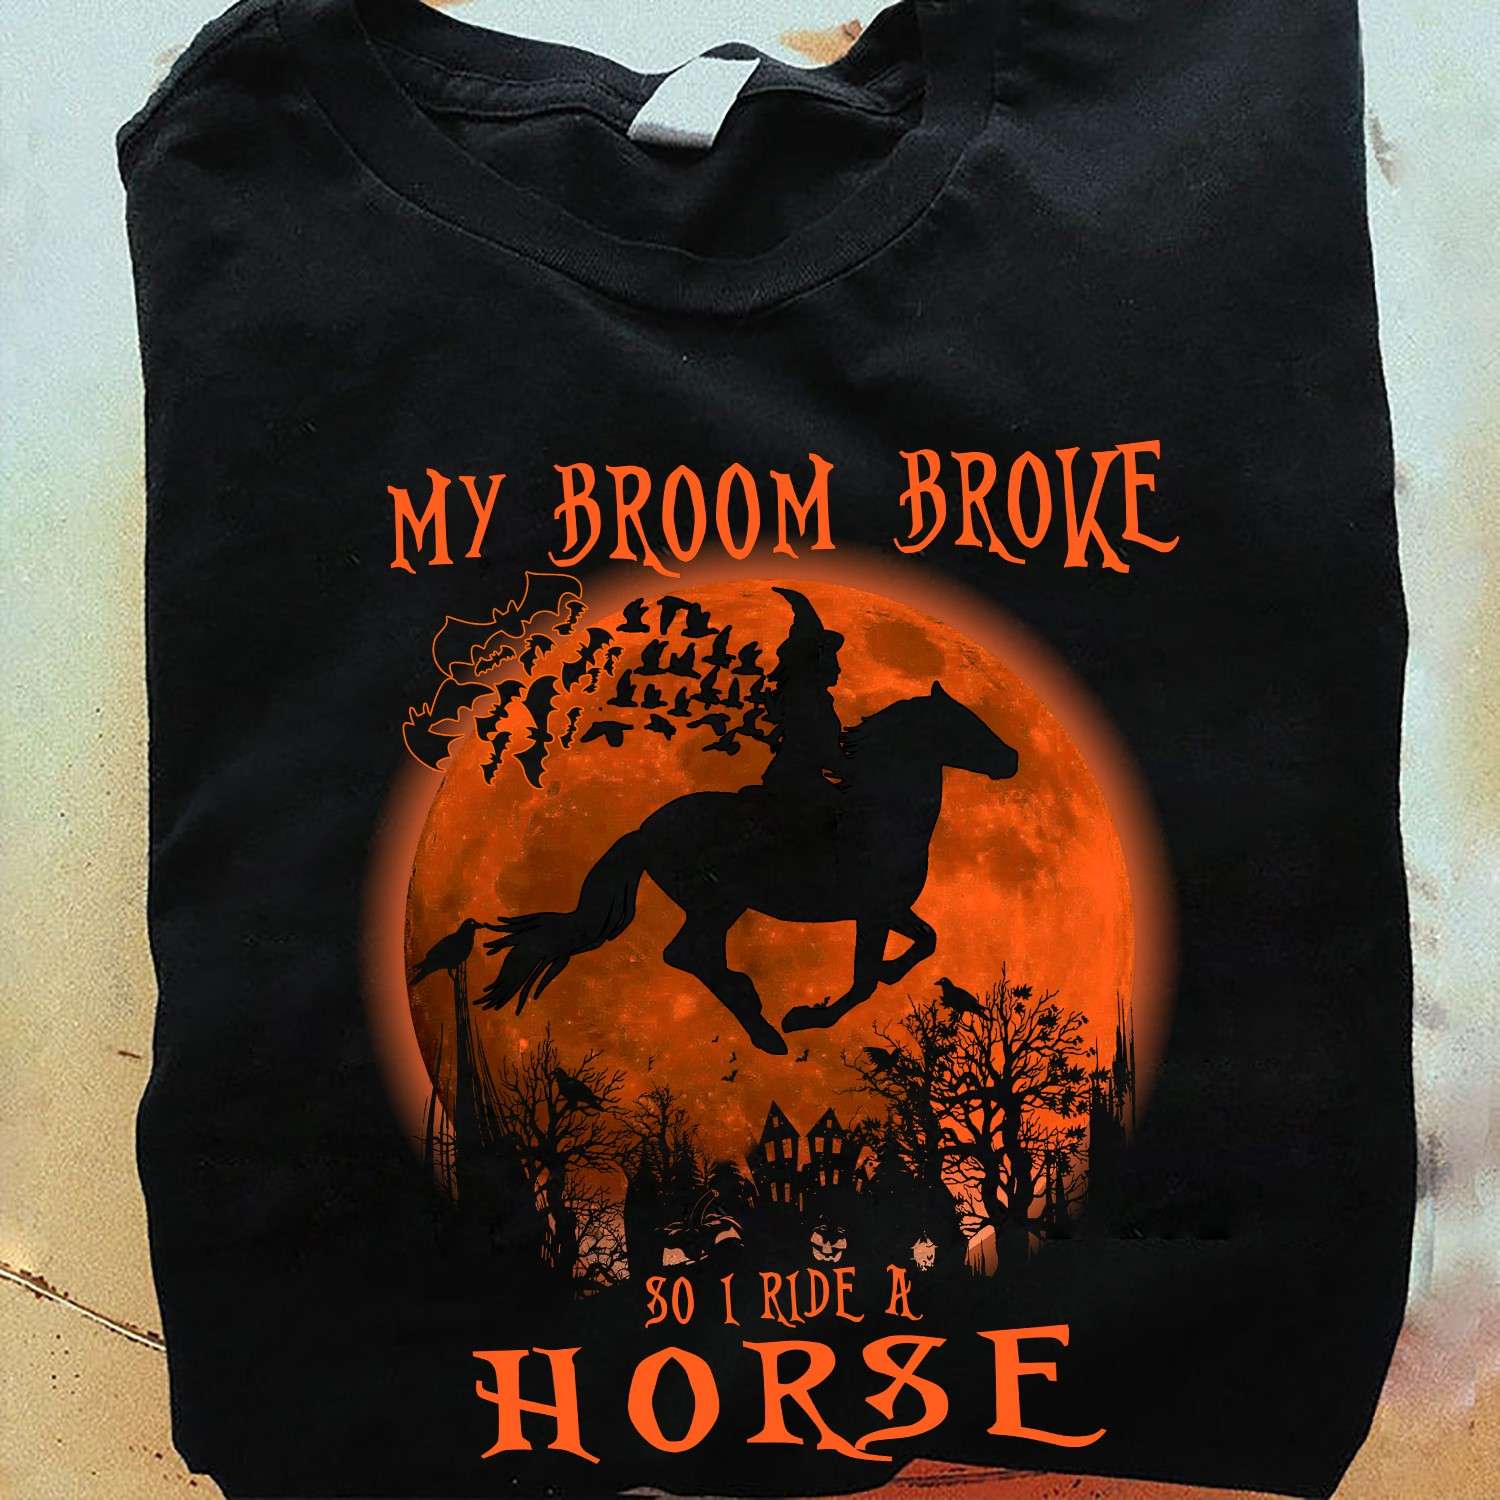 My broom broke so I ride a horse - Flying horse, witch riding horse, Halloween witch costume